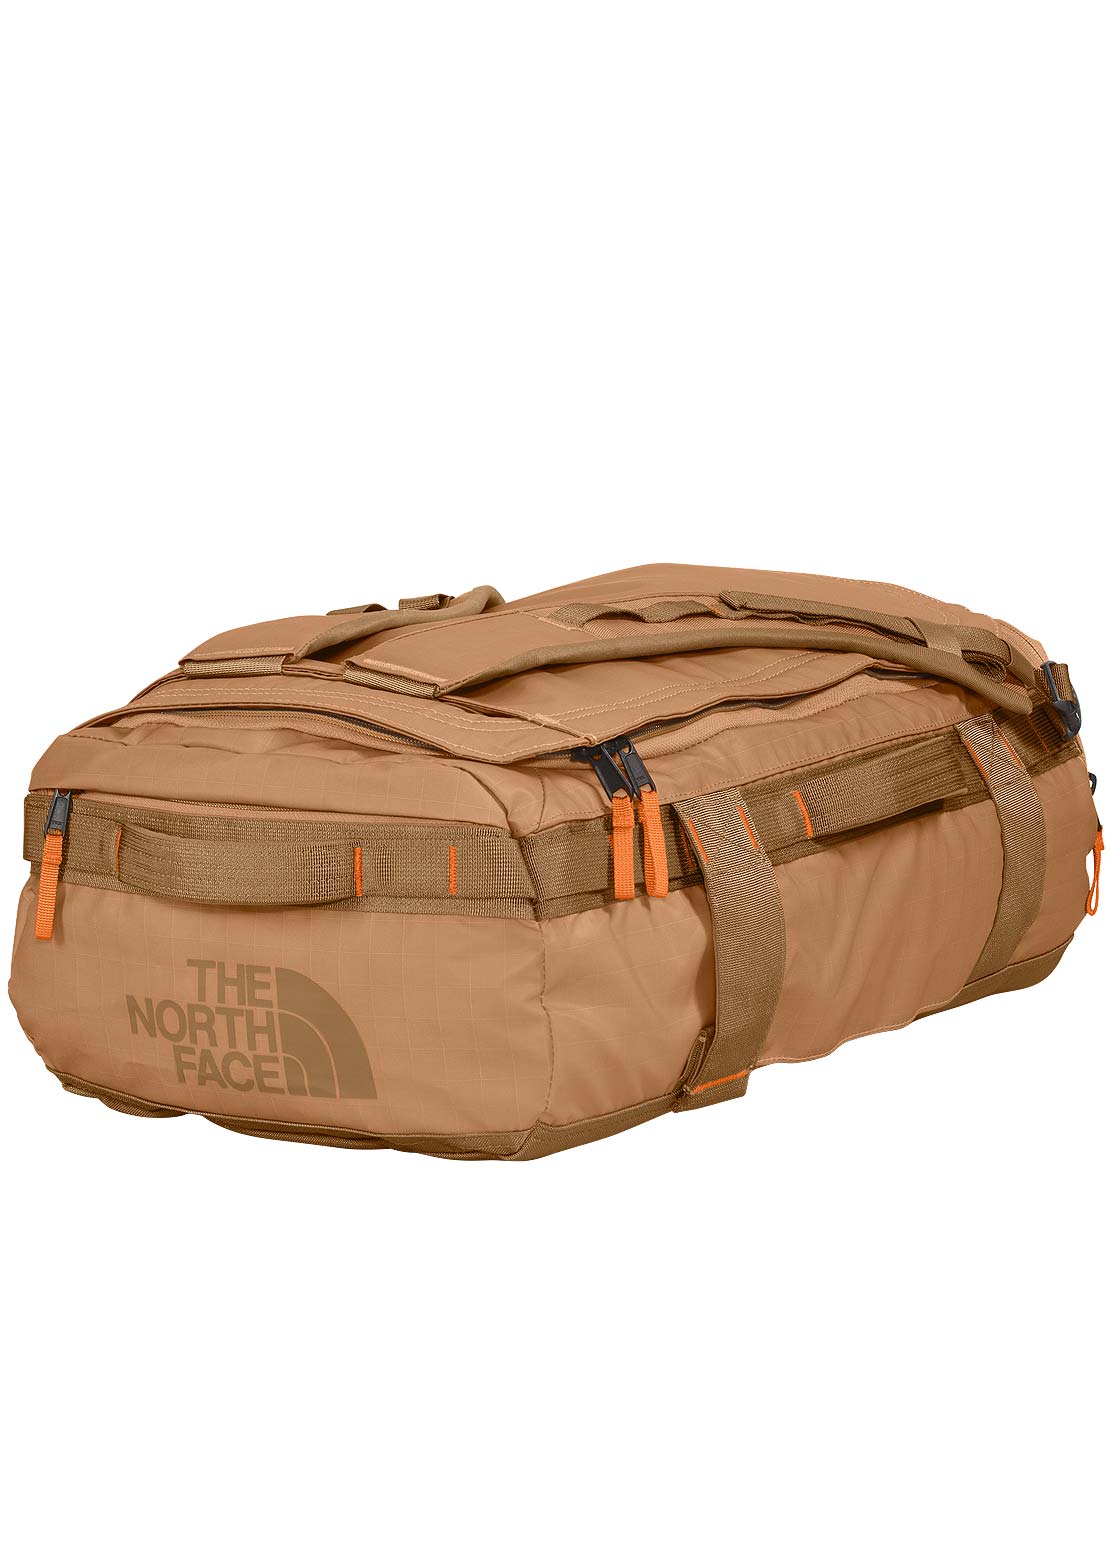 The North Face Base Camp Voyager 32 L Duffel Bag Almond Butter/Utility Brown/Mandarin